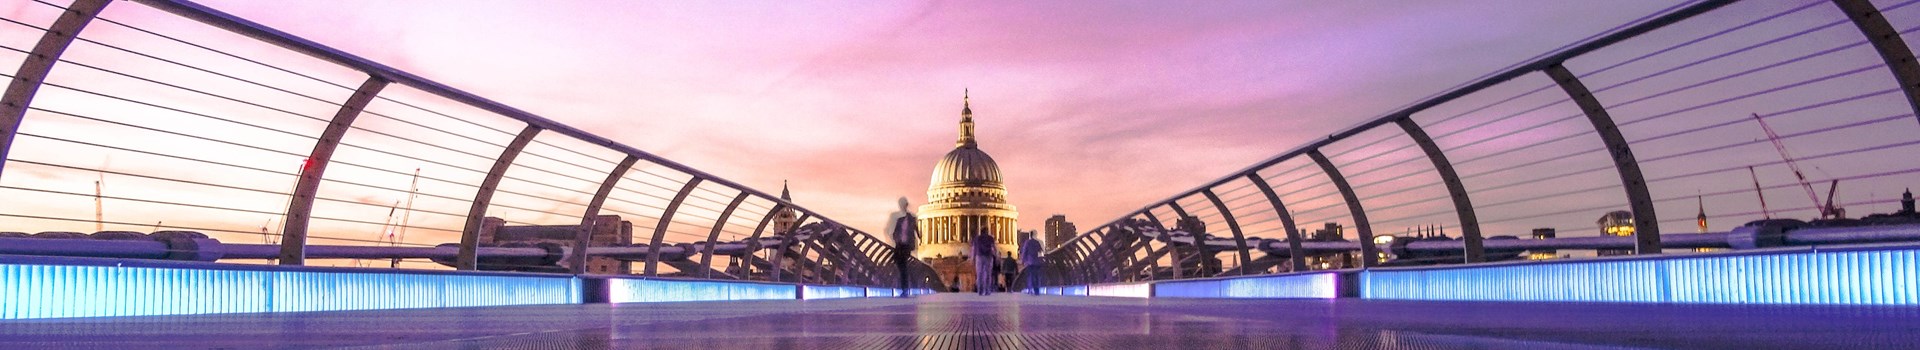 A view of St Paul's Cathedral application payment services